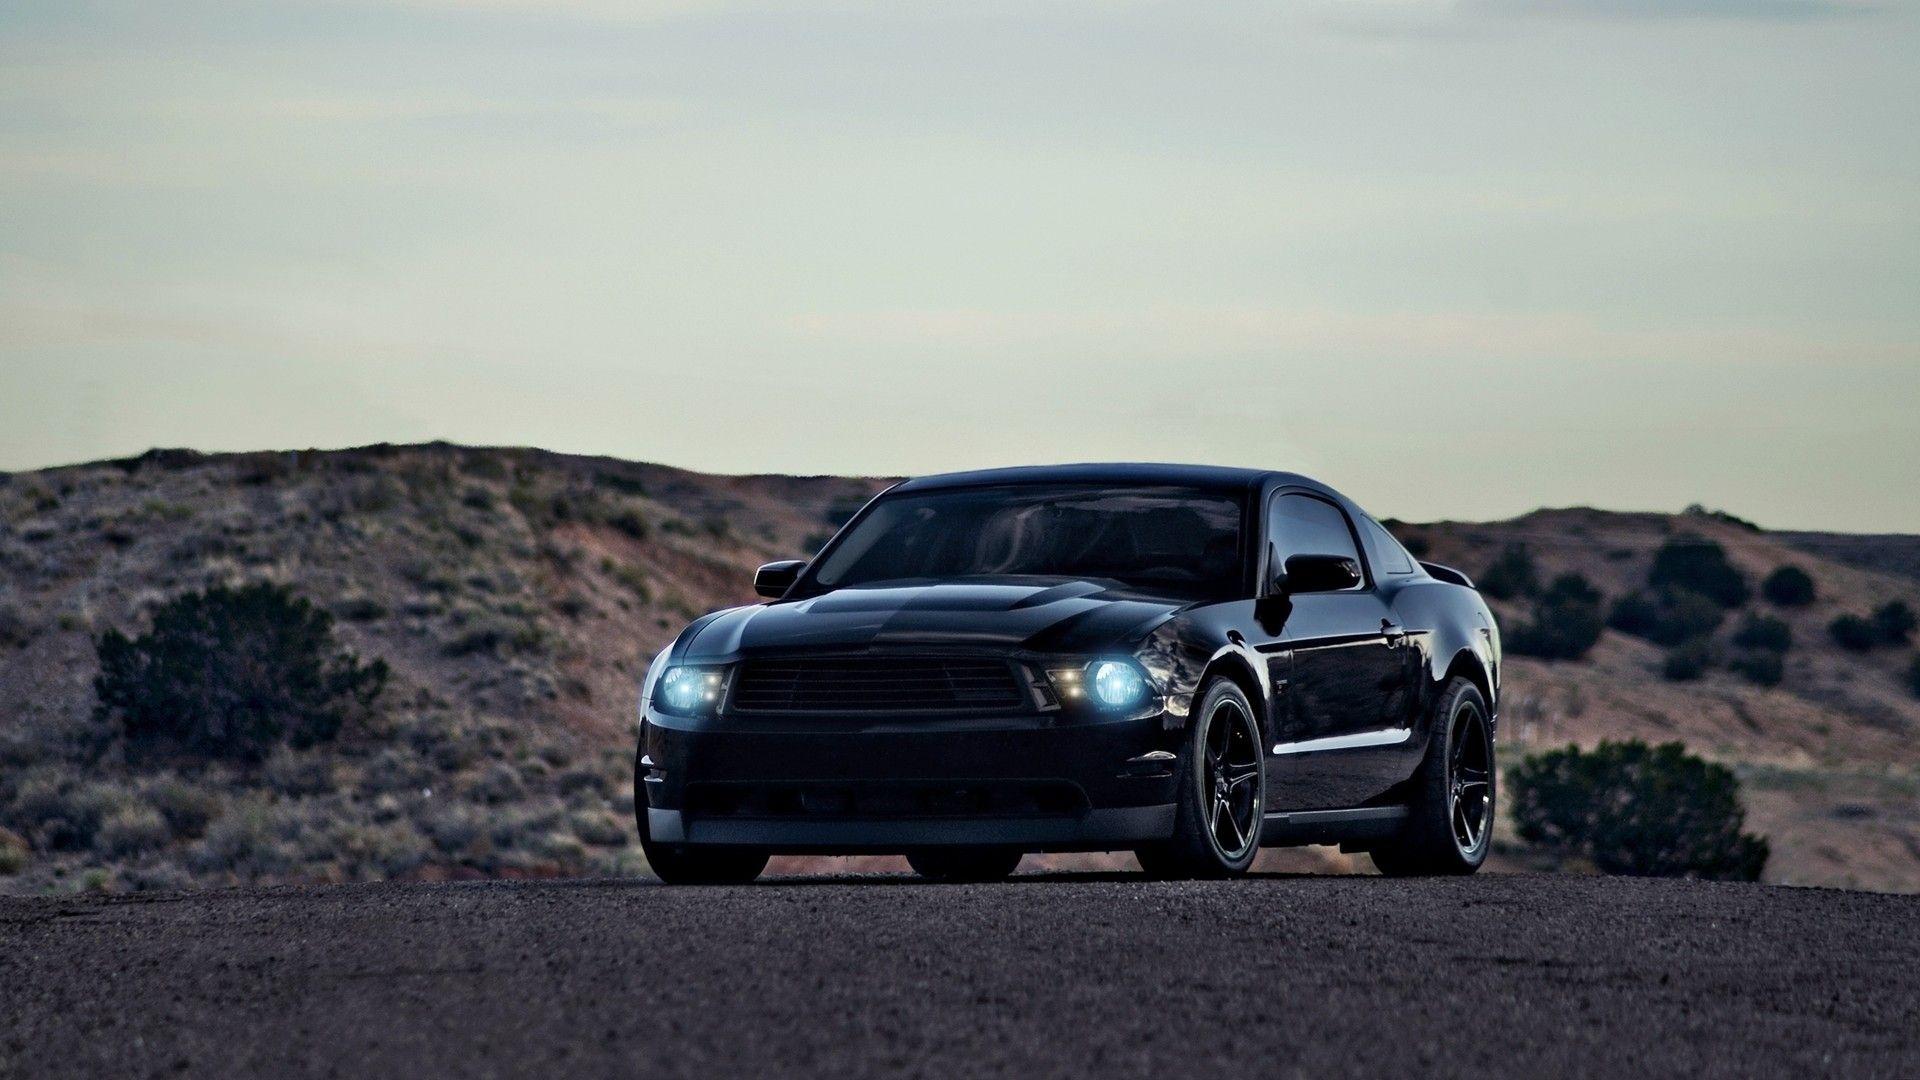 blue, black, cars, Ford, roads, vehicles, Ford Mustang, Shelby GT neon, automobile wallpaper